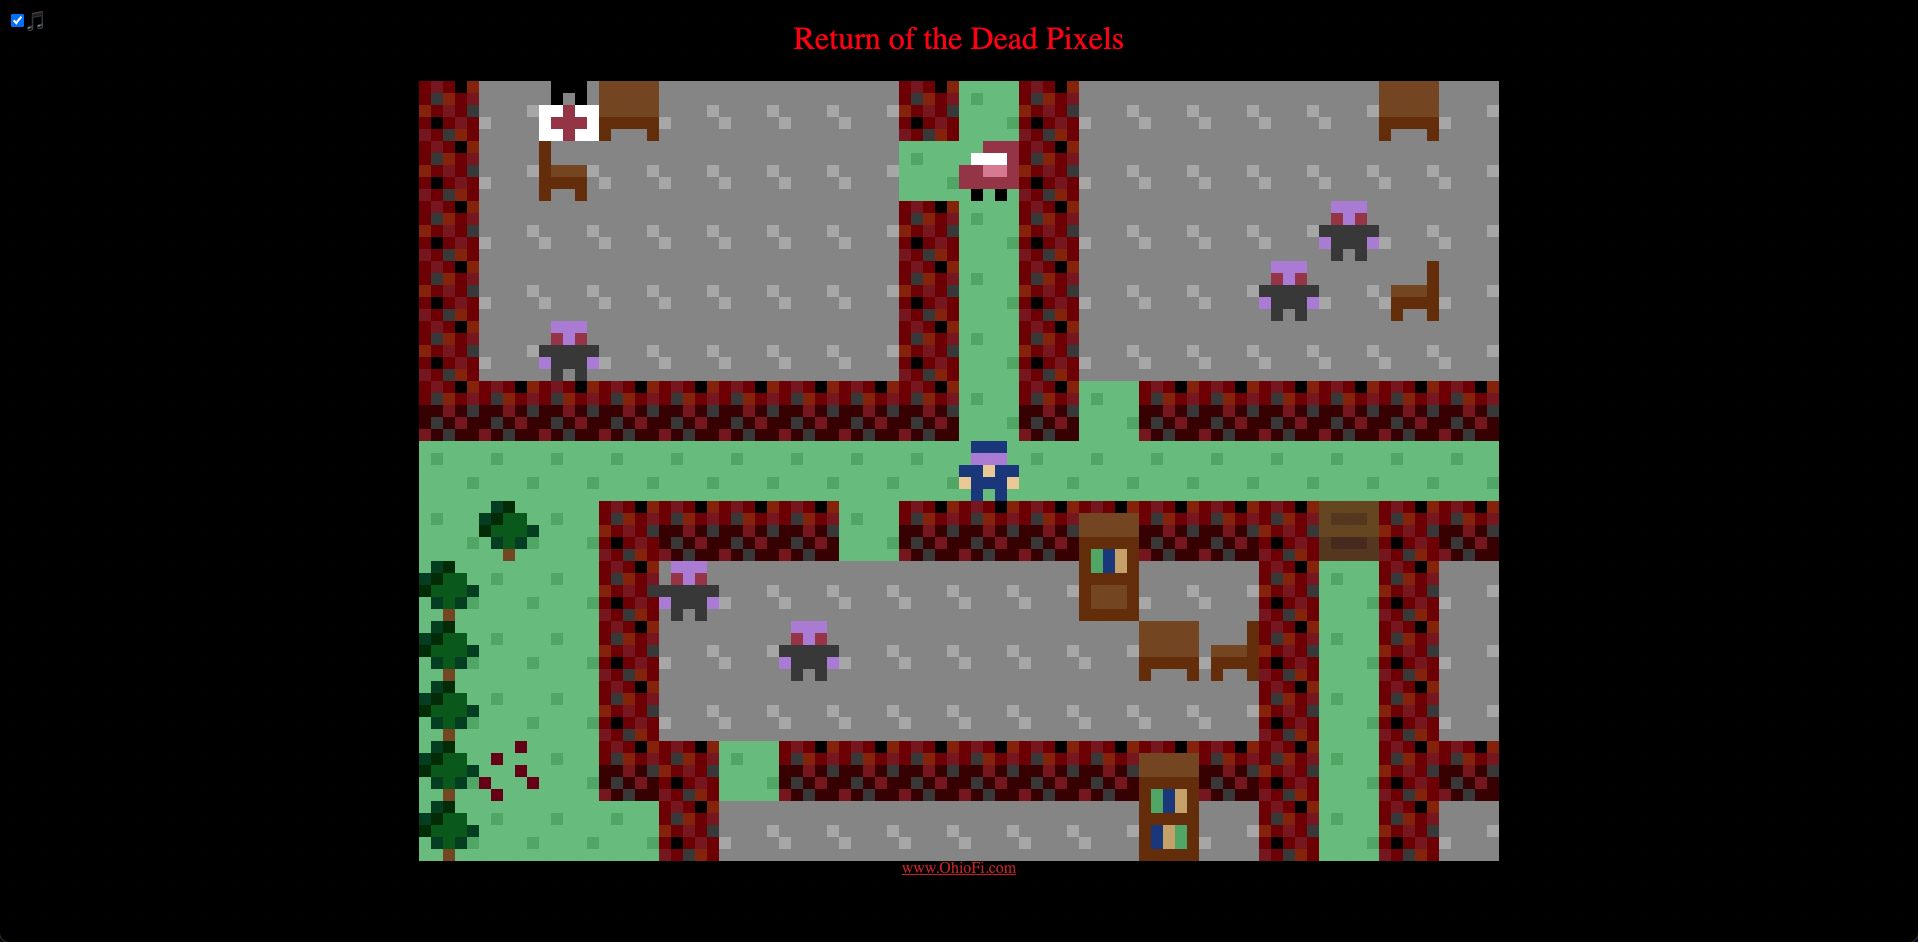 Screen shot from the video game 'Return of the Dead Pixels' showing zombies